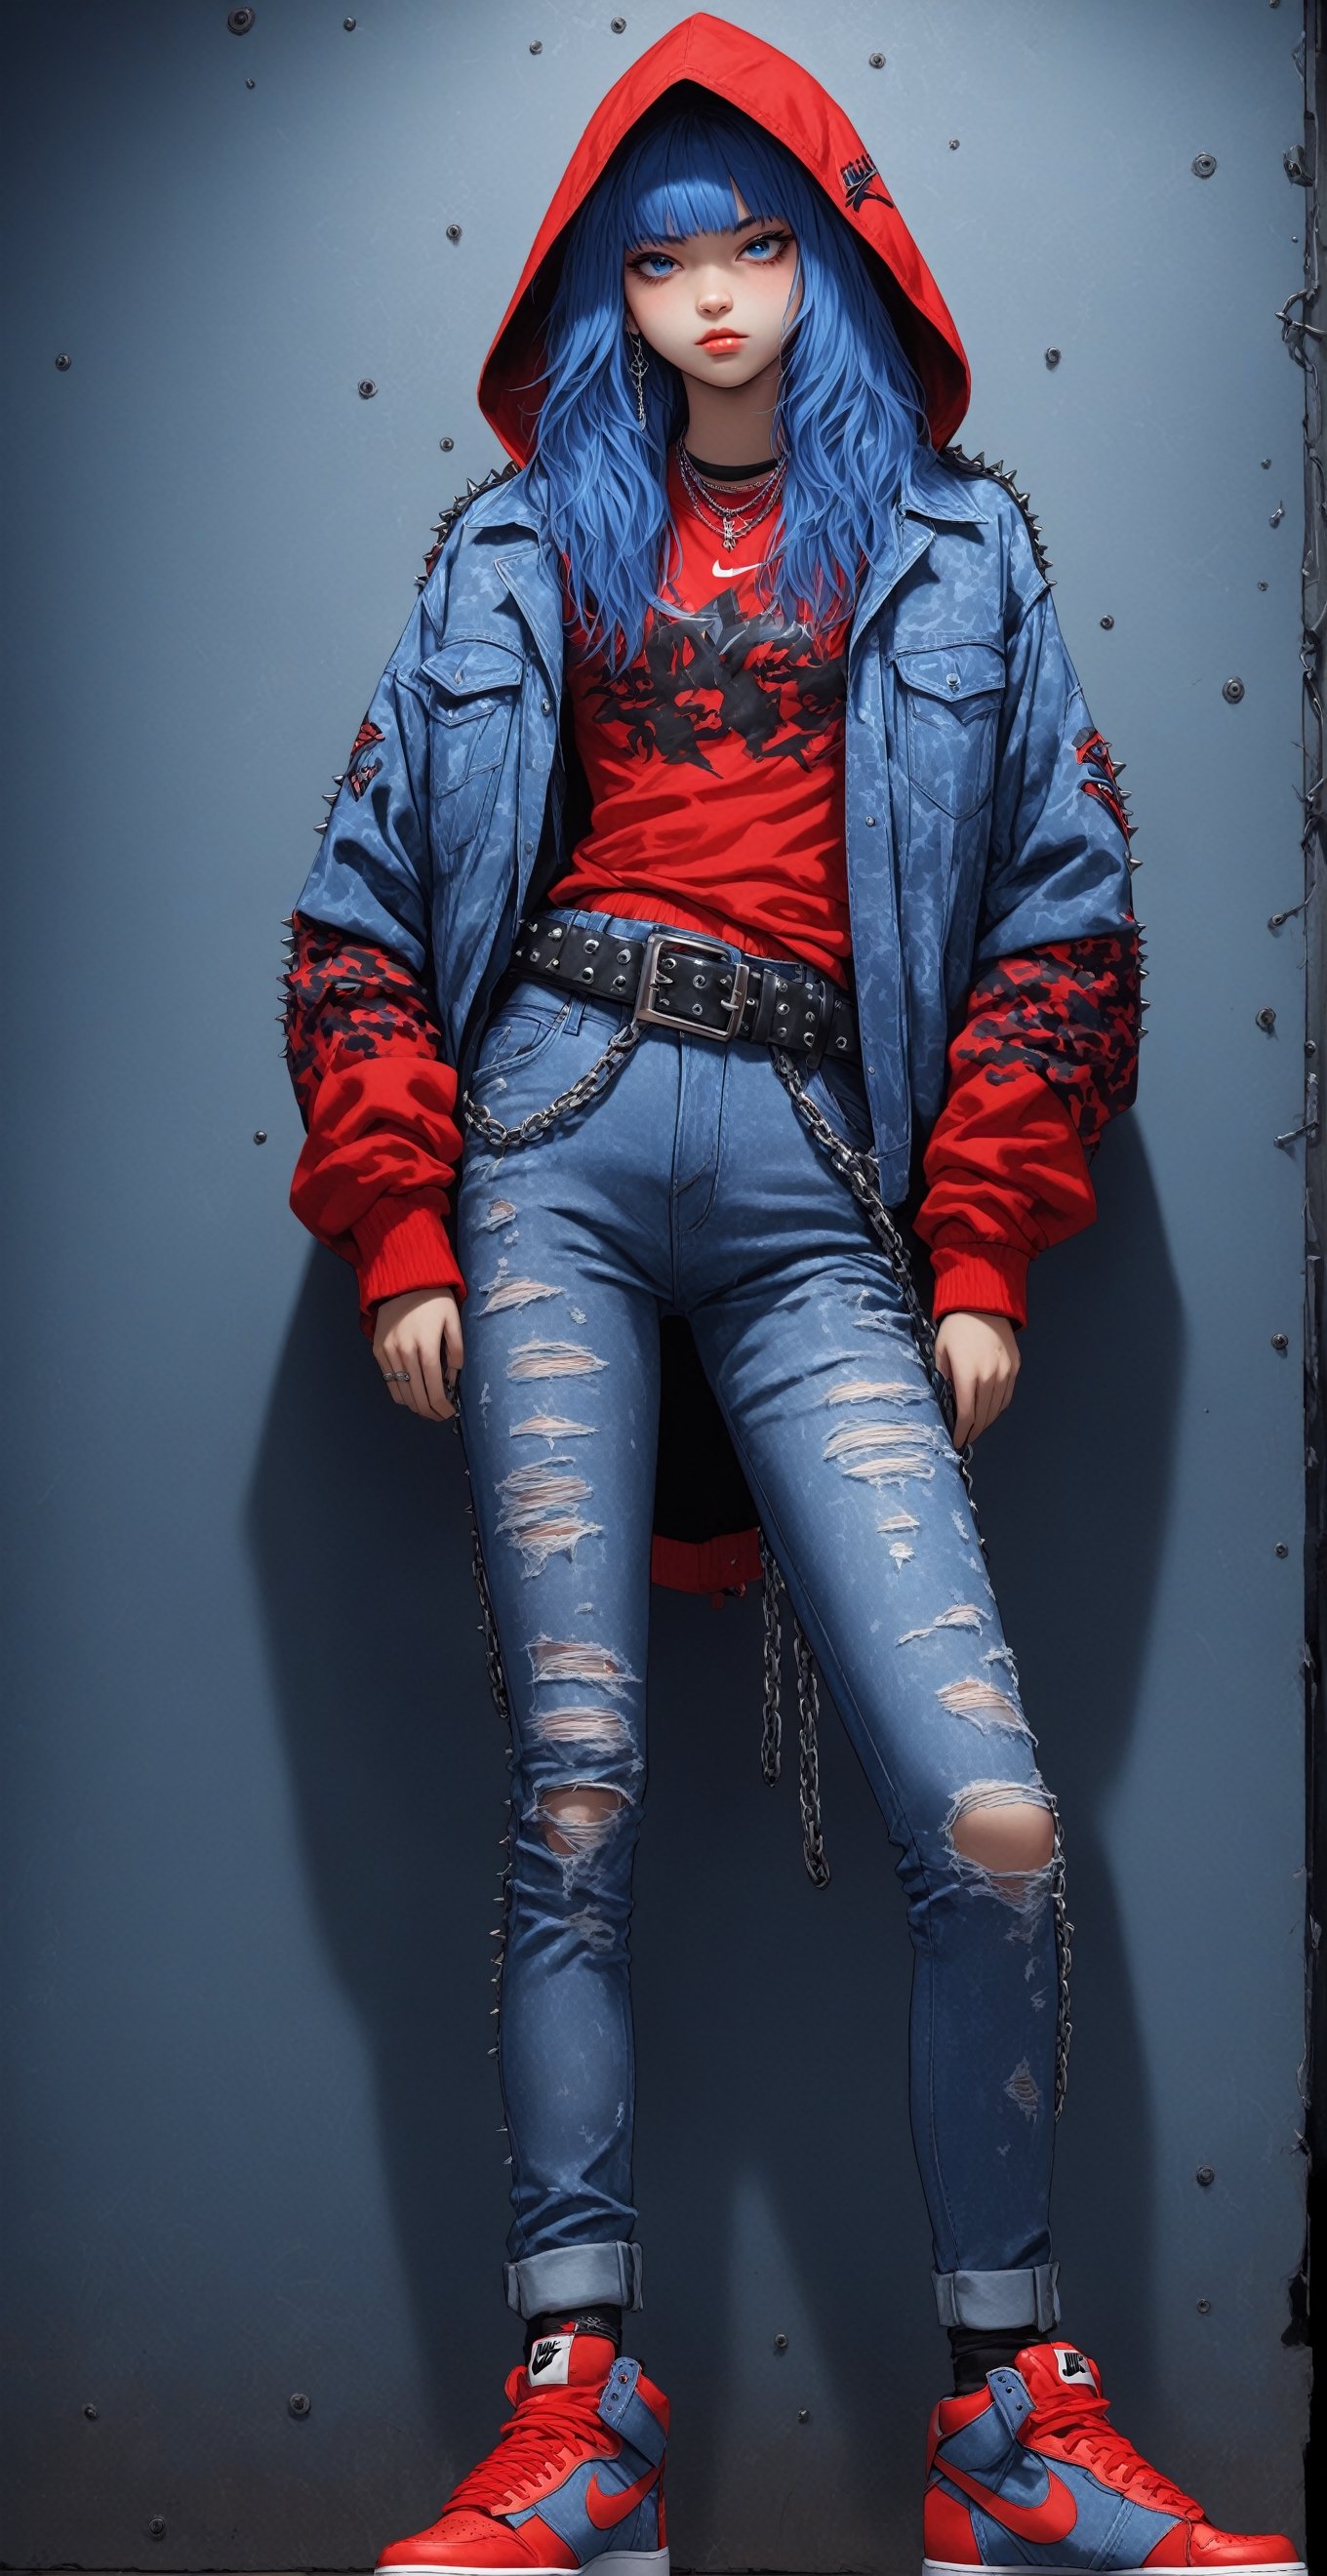 Extreme Detail,best quality,1 girl,18yo,Cute face,
1980’s thrash metal artist,(Wearing Blue Denim Jeket:1.8) ,camouflage pants,red hood, Nike Shoes, studded belt with chain,heavy_jacket